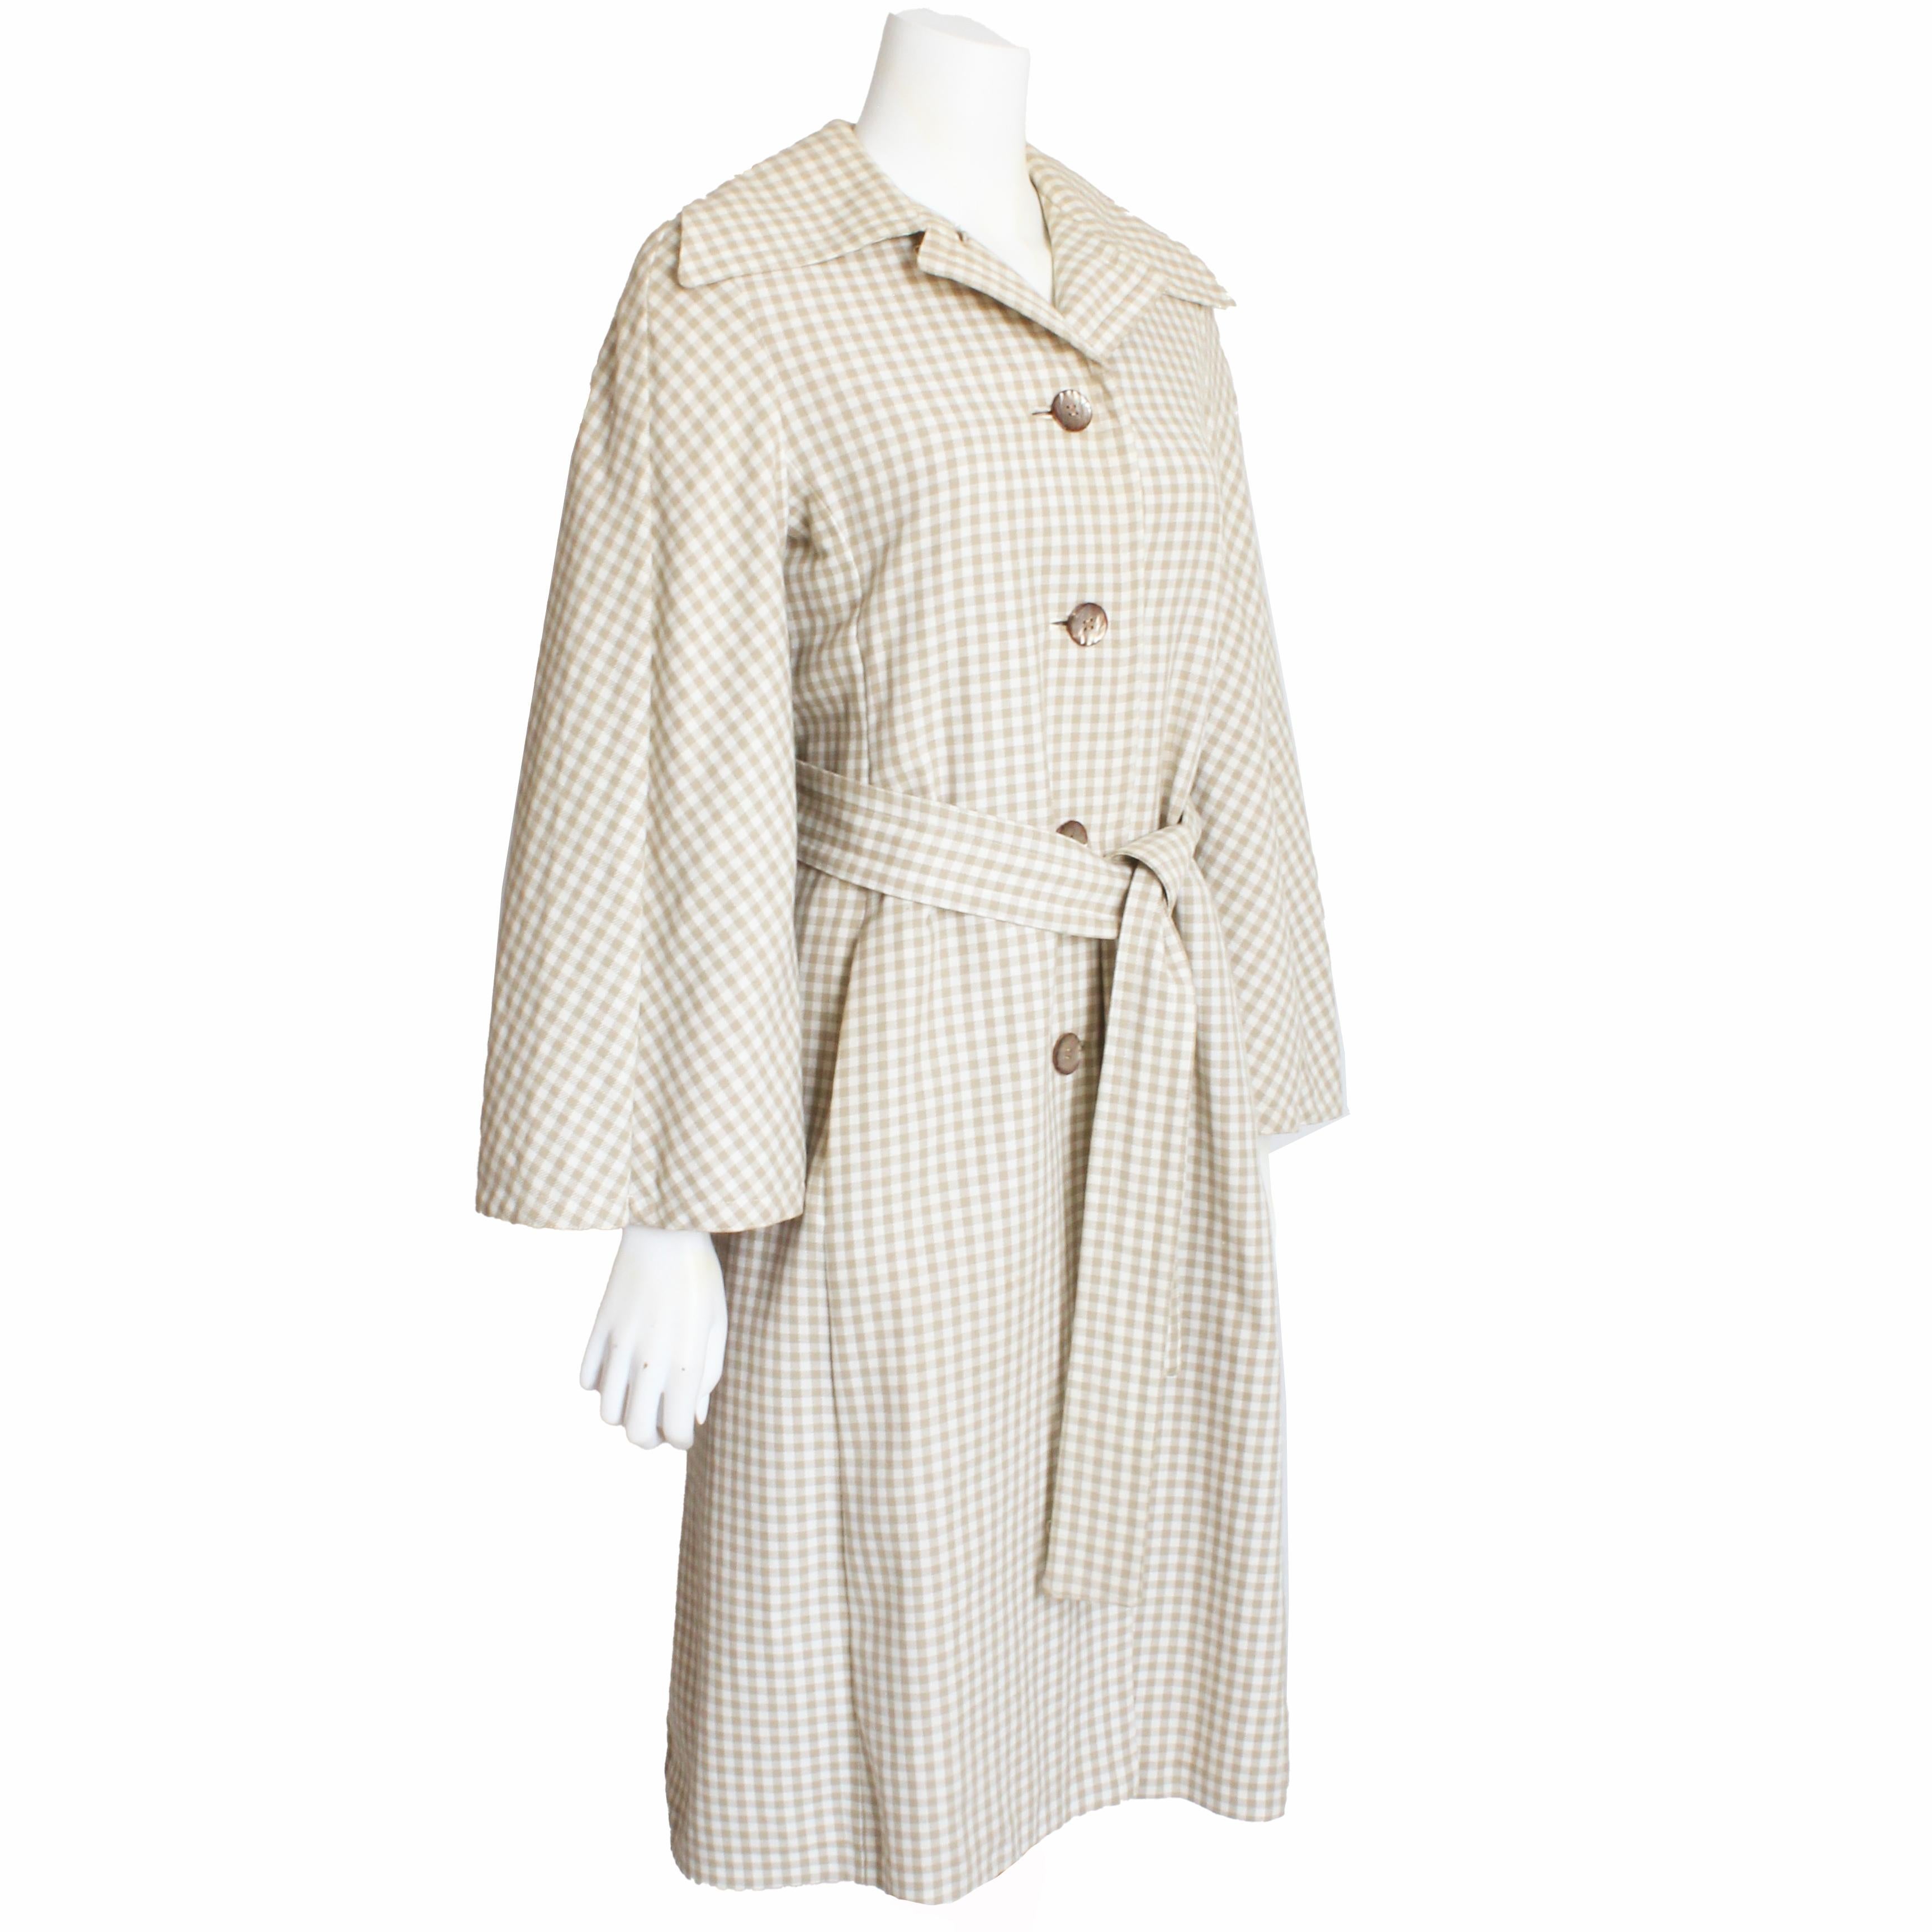 Authentic, preowned, vintage Donald Brooks trench style coat or jacket with attached caplet/cape, circa the 70s. Made from a light weight tan and white check woven fabric, it fastens with buttons and comes with a tie-wrap belt.

A timeless piece of